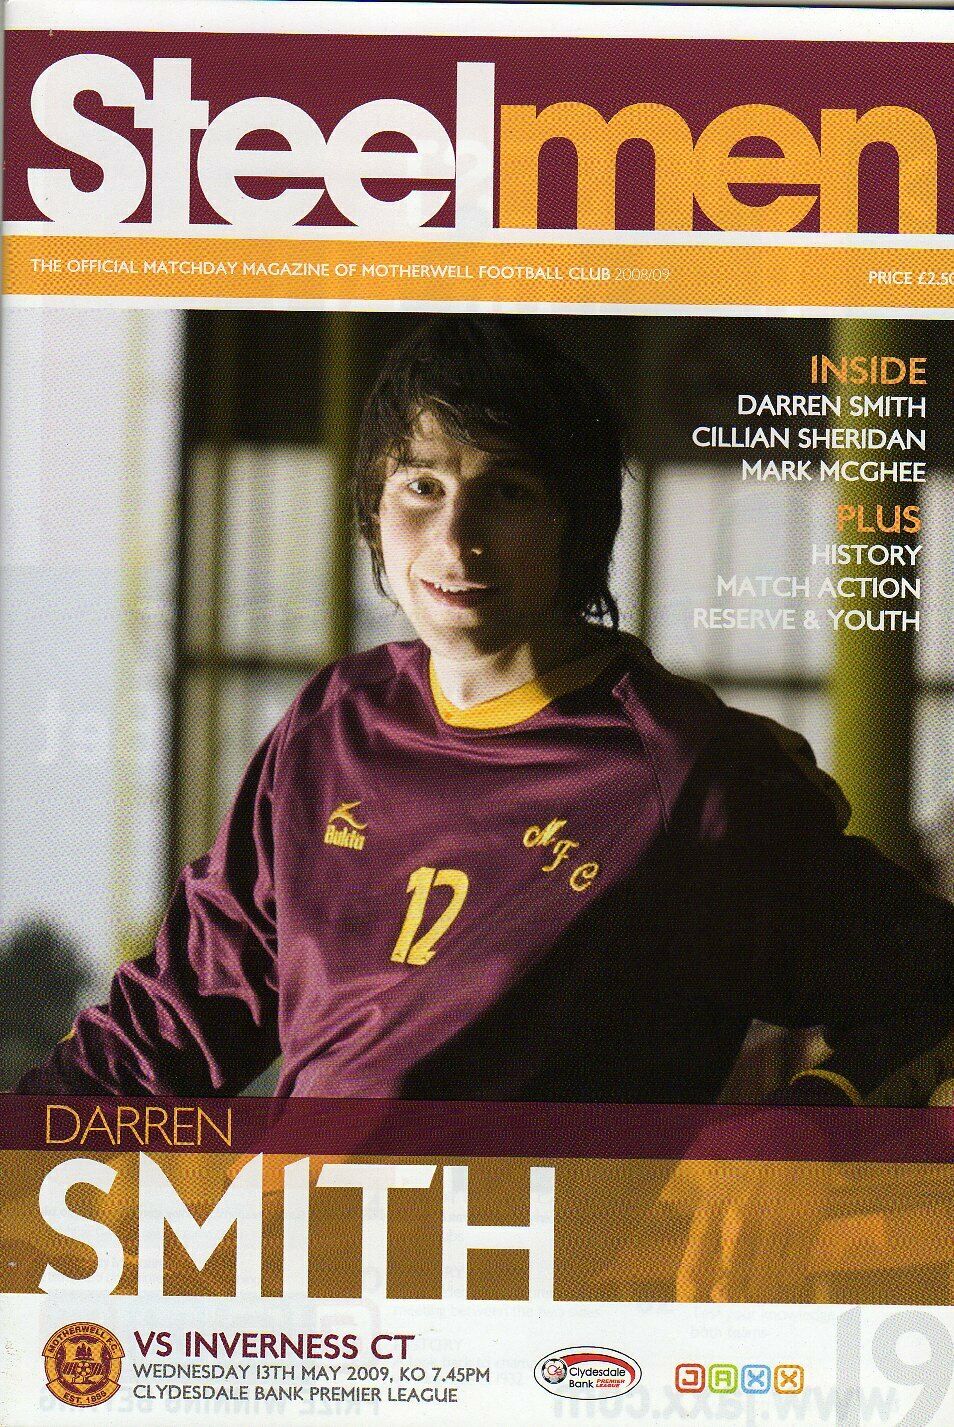 versus Inverness CT Programme Cover